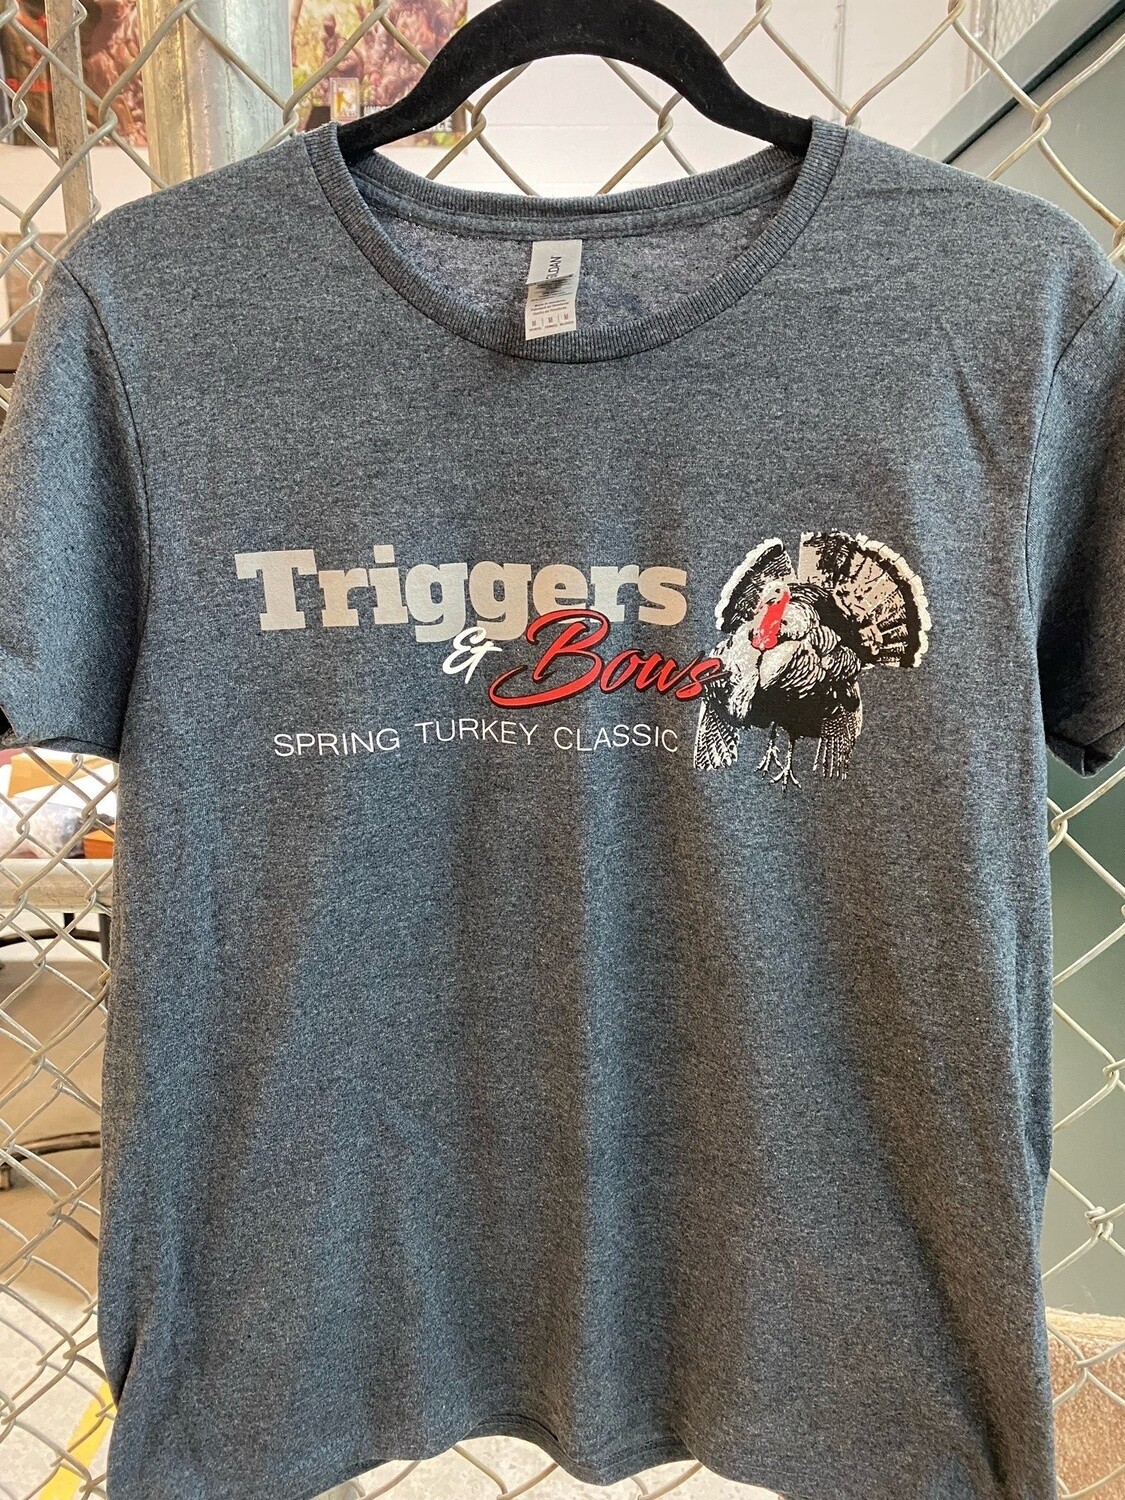 Triggers and Bows Spring Turkey Classic Ladies T-Shirt, Color: Dark Heather Grey, Size: S